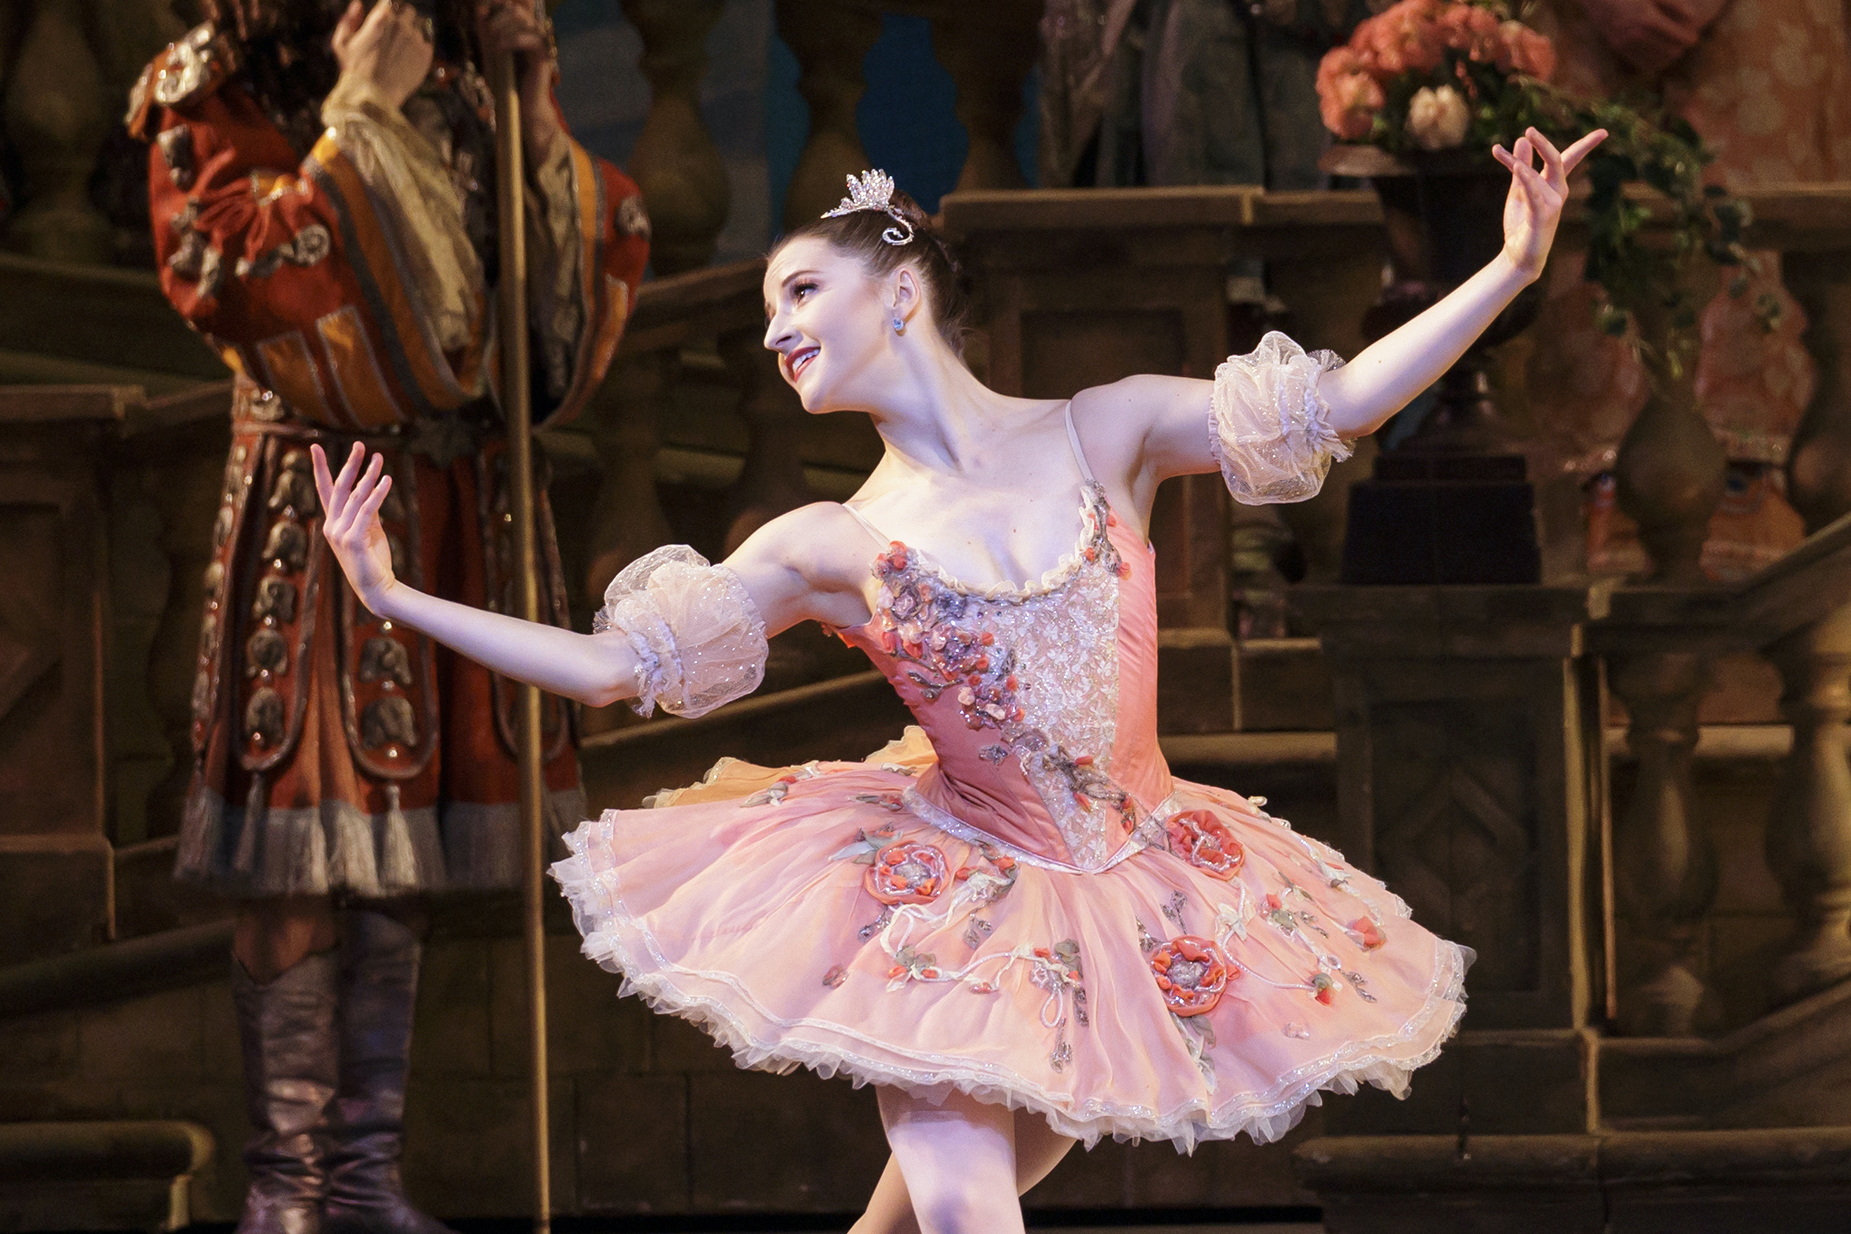 Indiana Woodward performs onstage as Princess Aurora in The Sleeping Beauty. She is shown from the thigh up wearing a pink tutu with rosette embellishments on the bodice and tutu and puffy sleevelets on her upper arms. She neds her body slightly to her right and looks over her right shoulder, smiling brightly, and opens her arms generously, curving them up at the elbow.